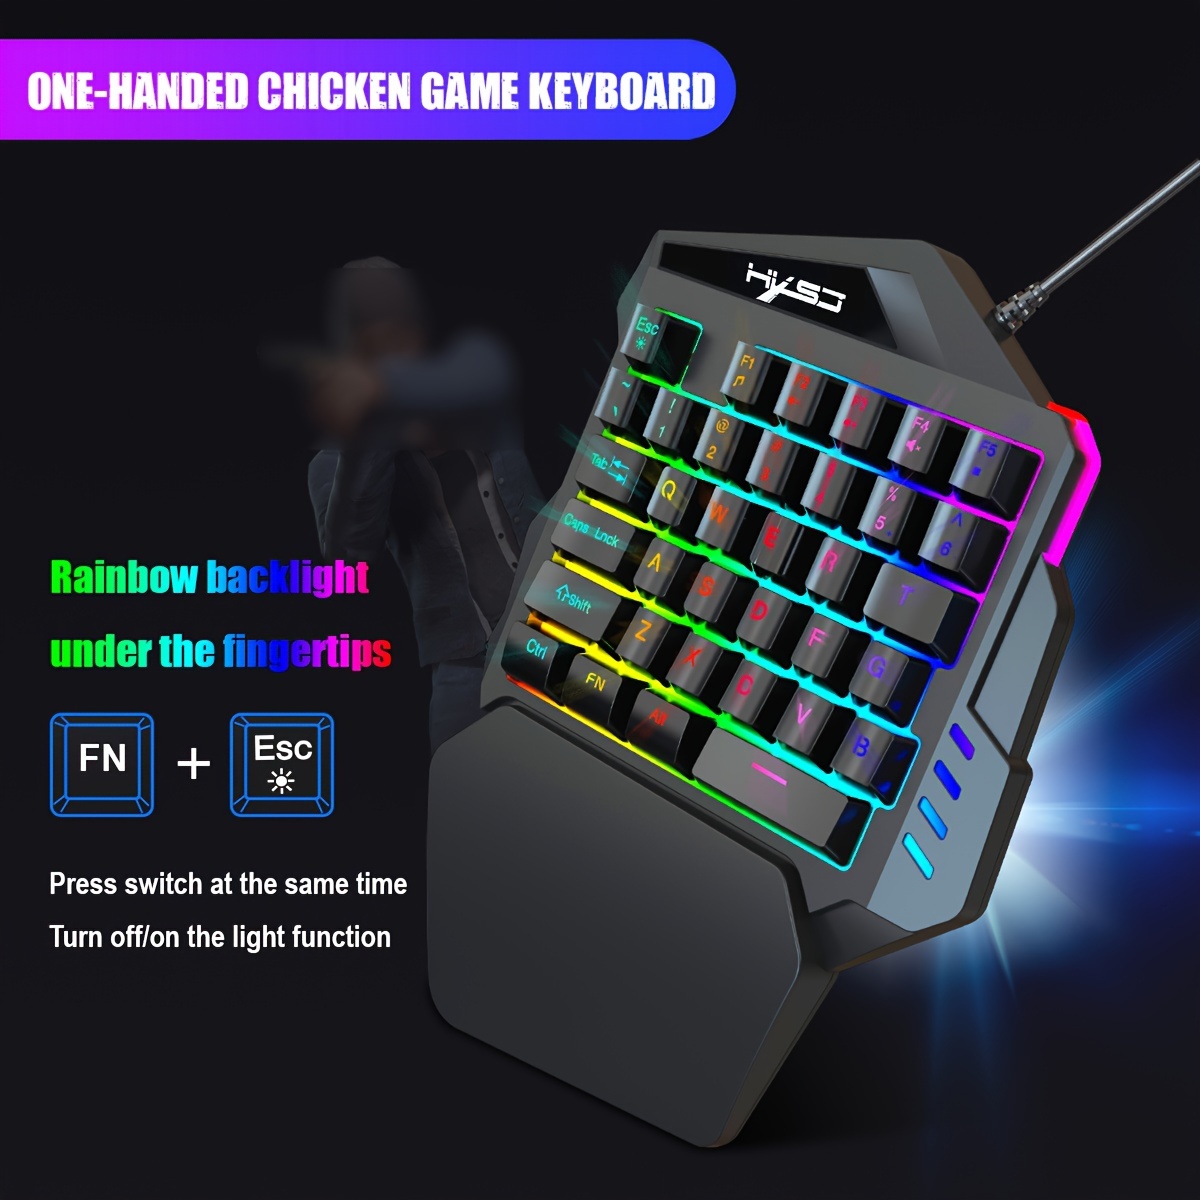 

Hxsj, A Wired Usb Gaming Keyboard With 35 Keys, Dual Color Injection Molded Keycaps, Film, 1 Handed Keyboard, Color Backlight, Left Handed Keyboard Suitable For Gaming And Esports Peripherals